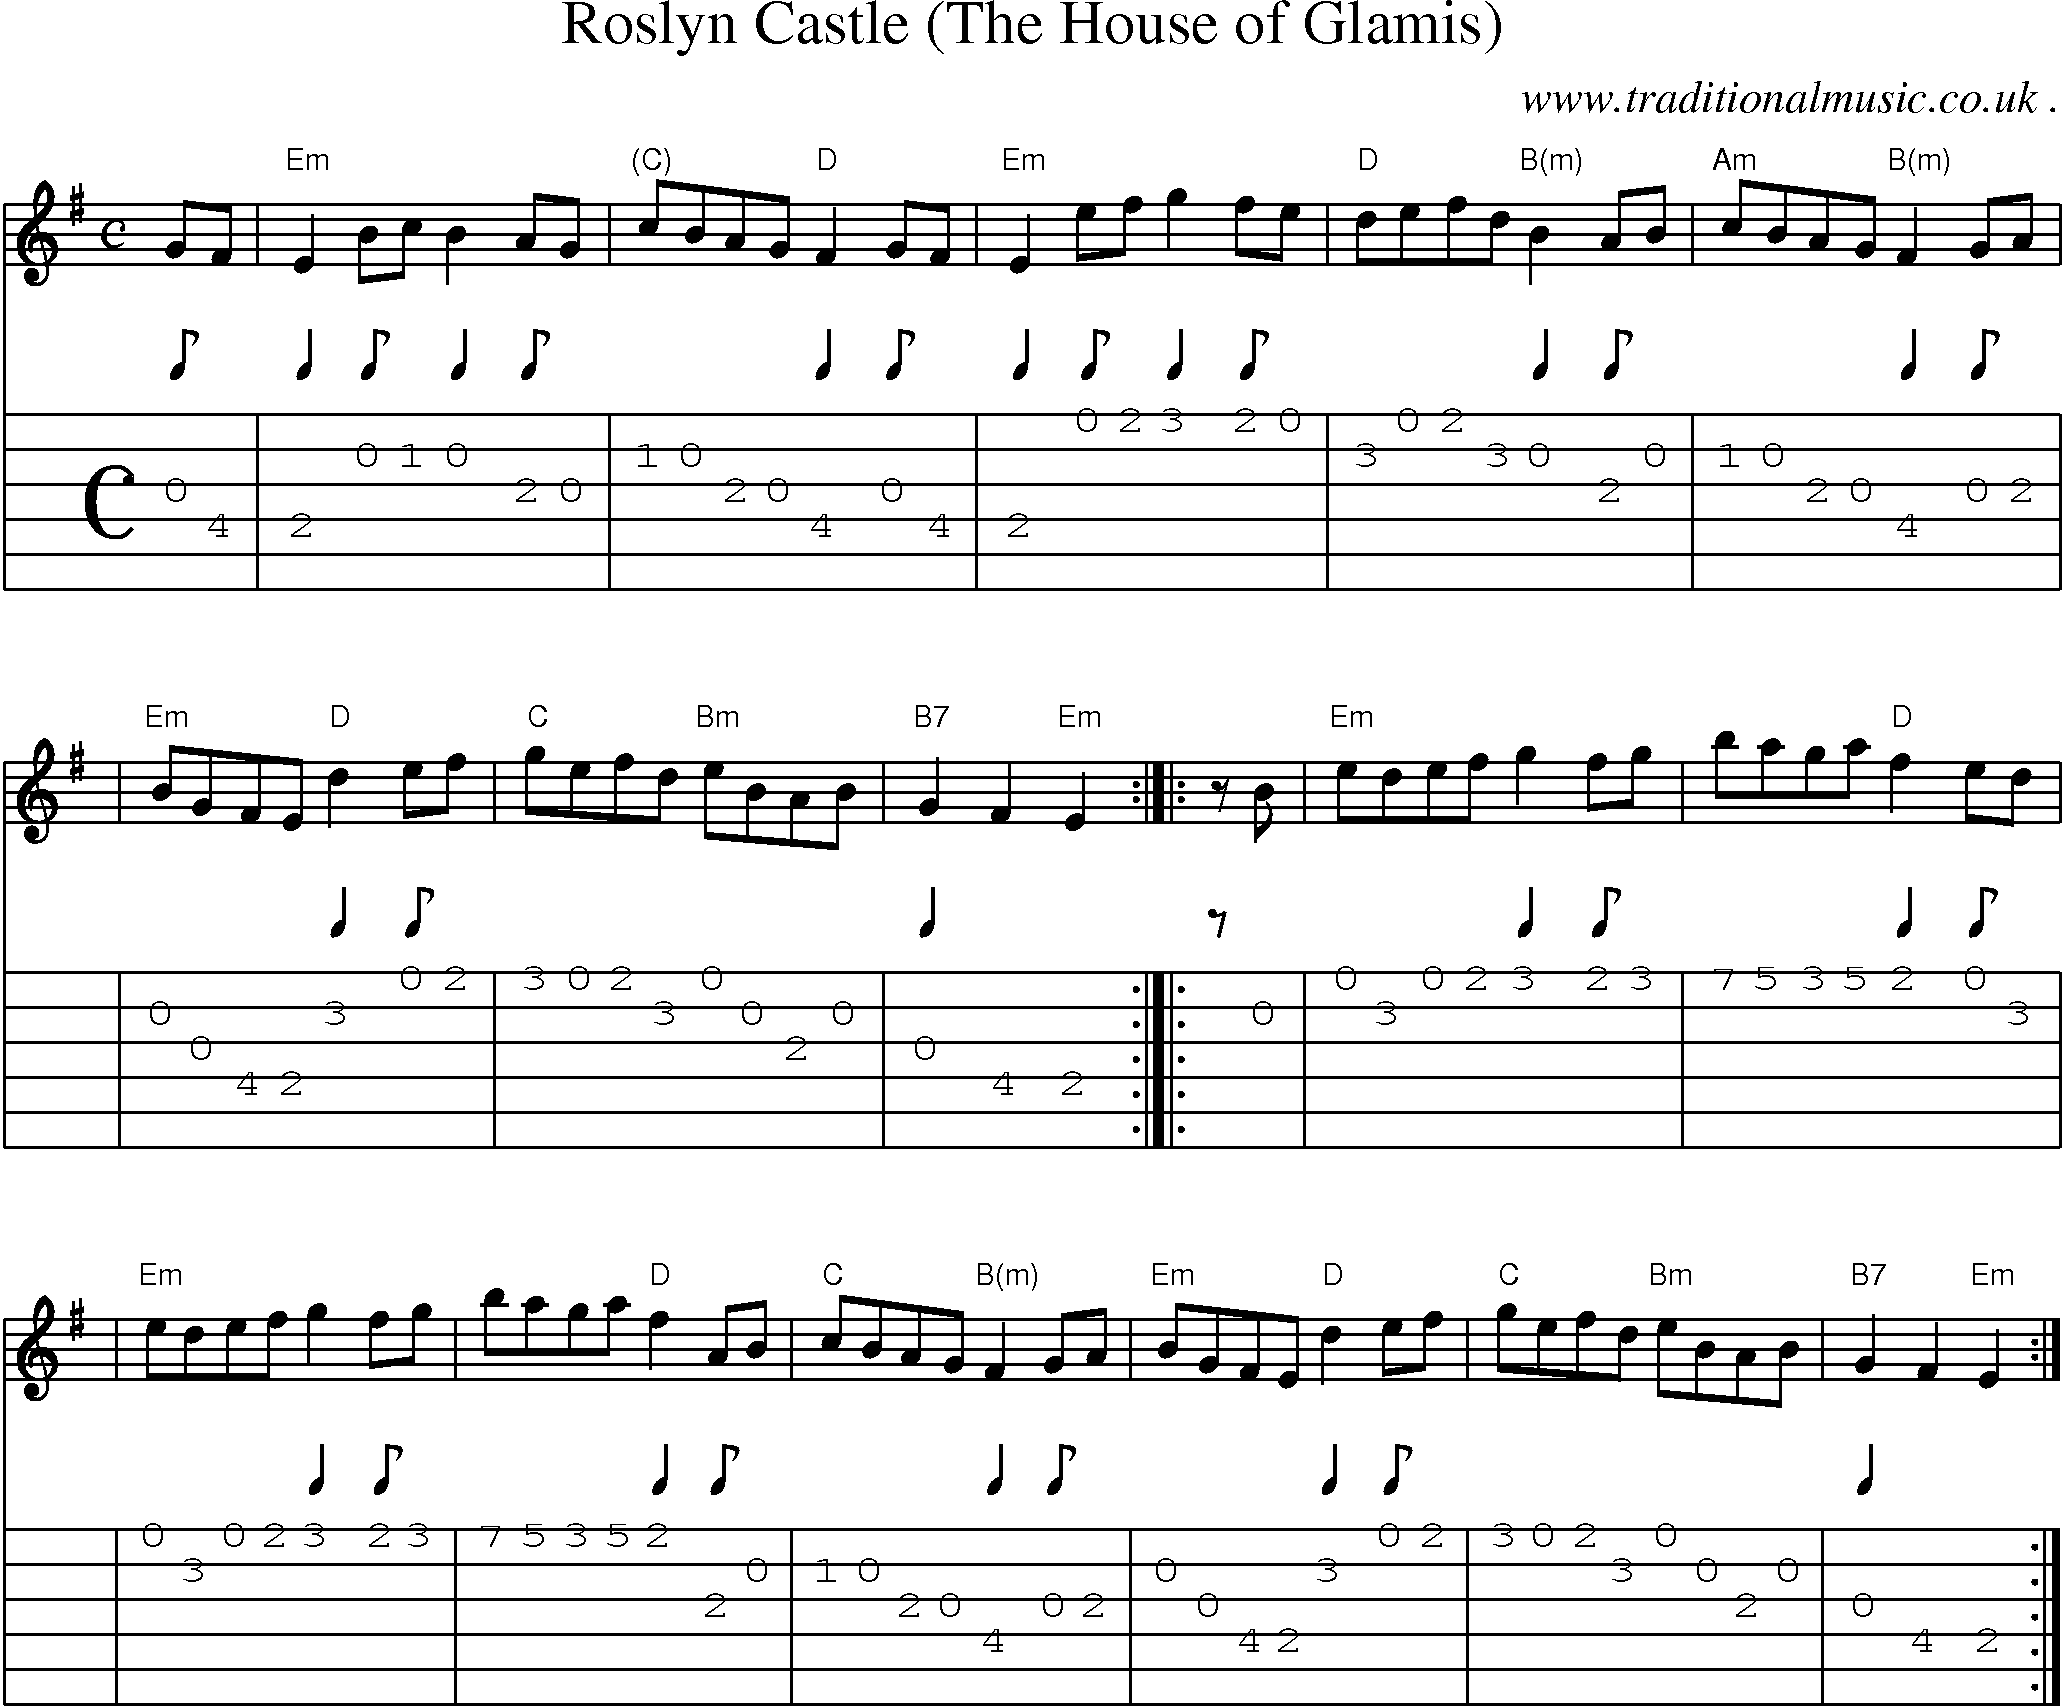 Sheet-music  score, Chords and Guitar Tabs for Roslyn Castle The House Of Glamis